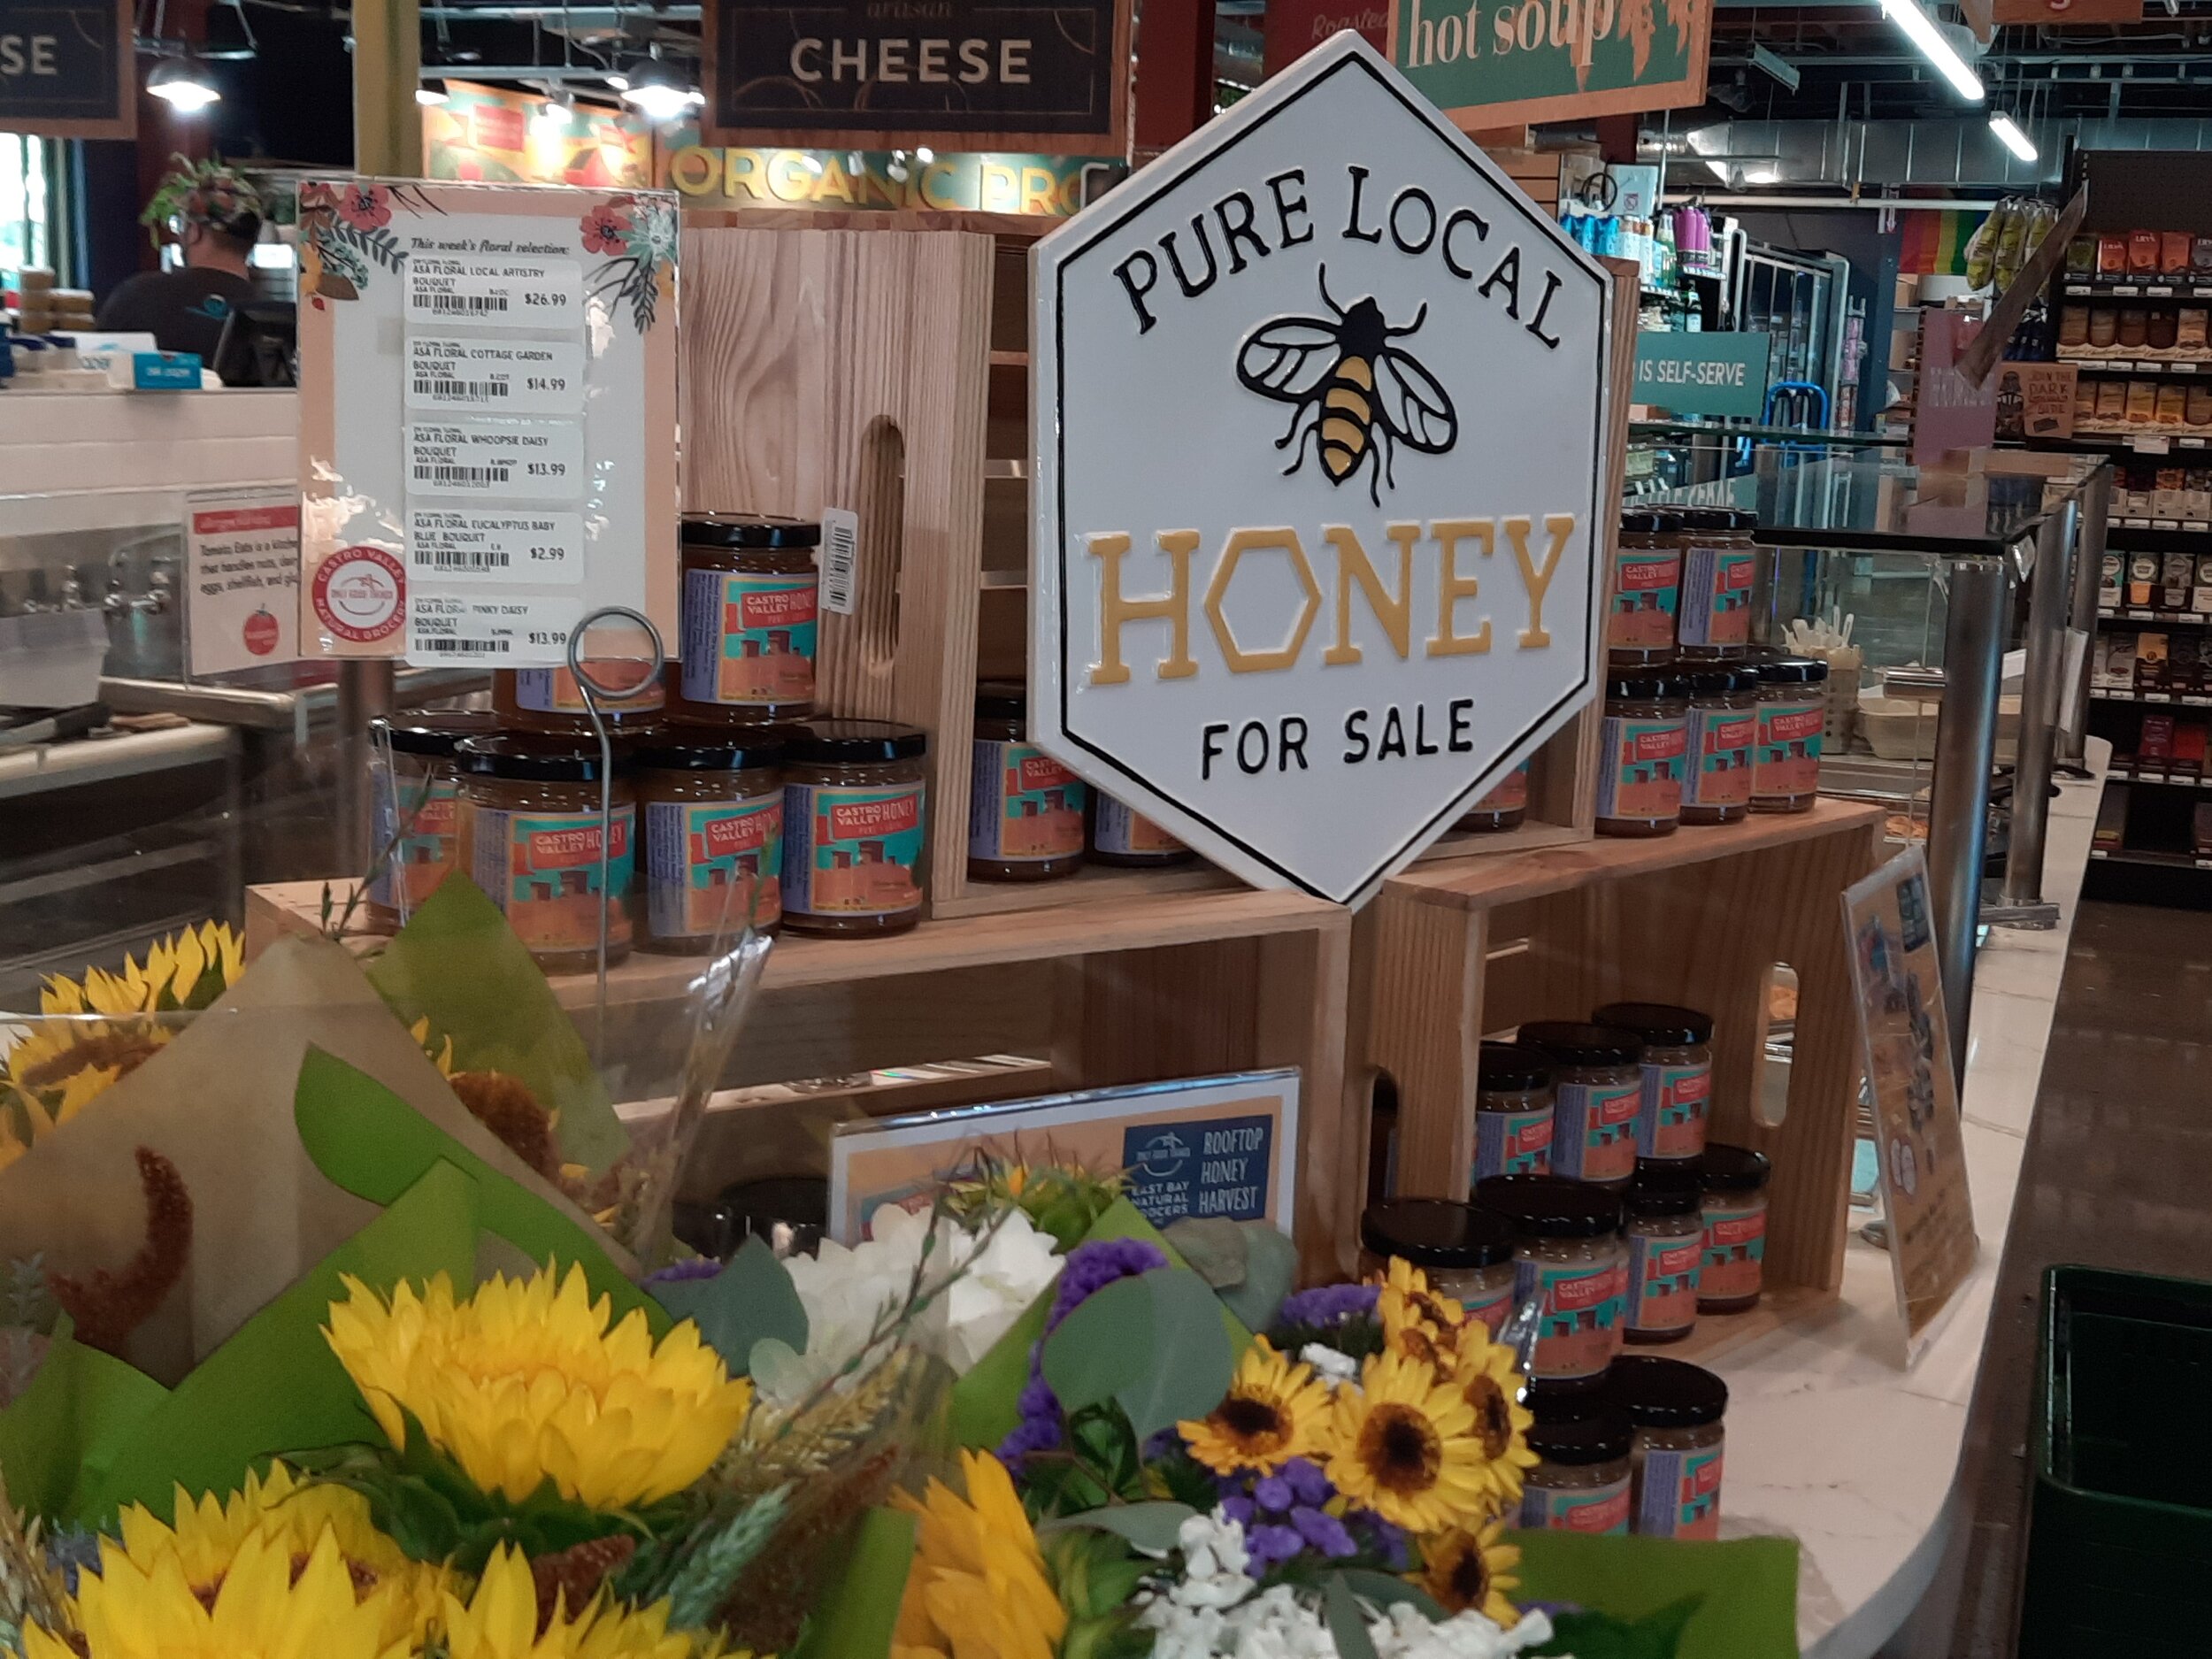   Natural Grocery harvested 250&nbsp;pounds of honey this year at it’s CV location.  